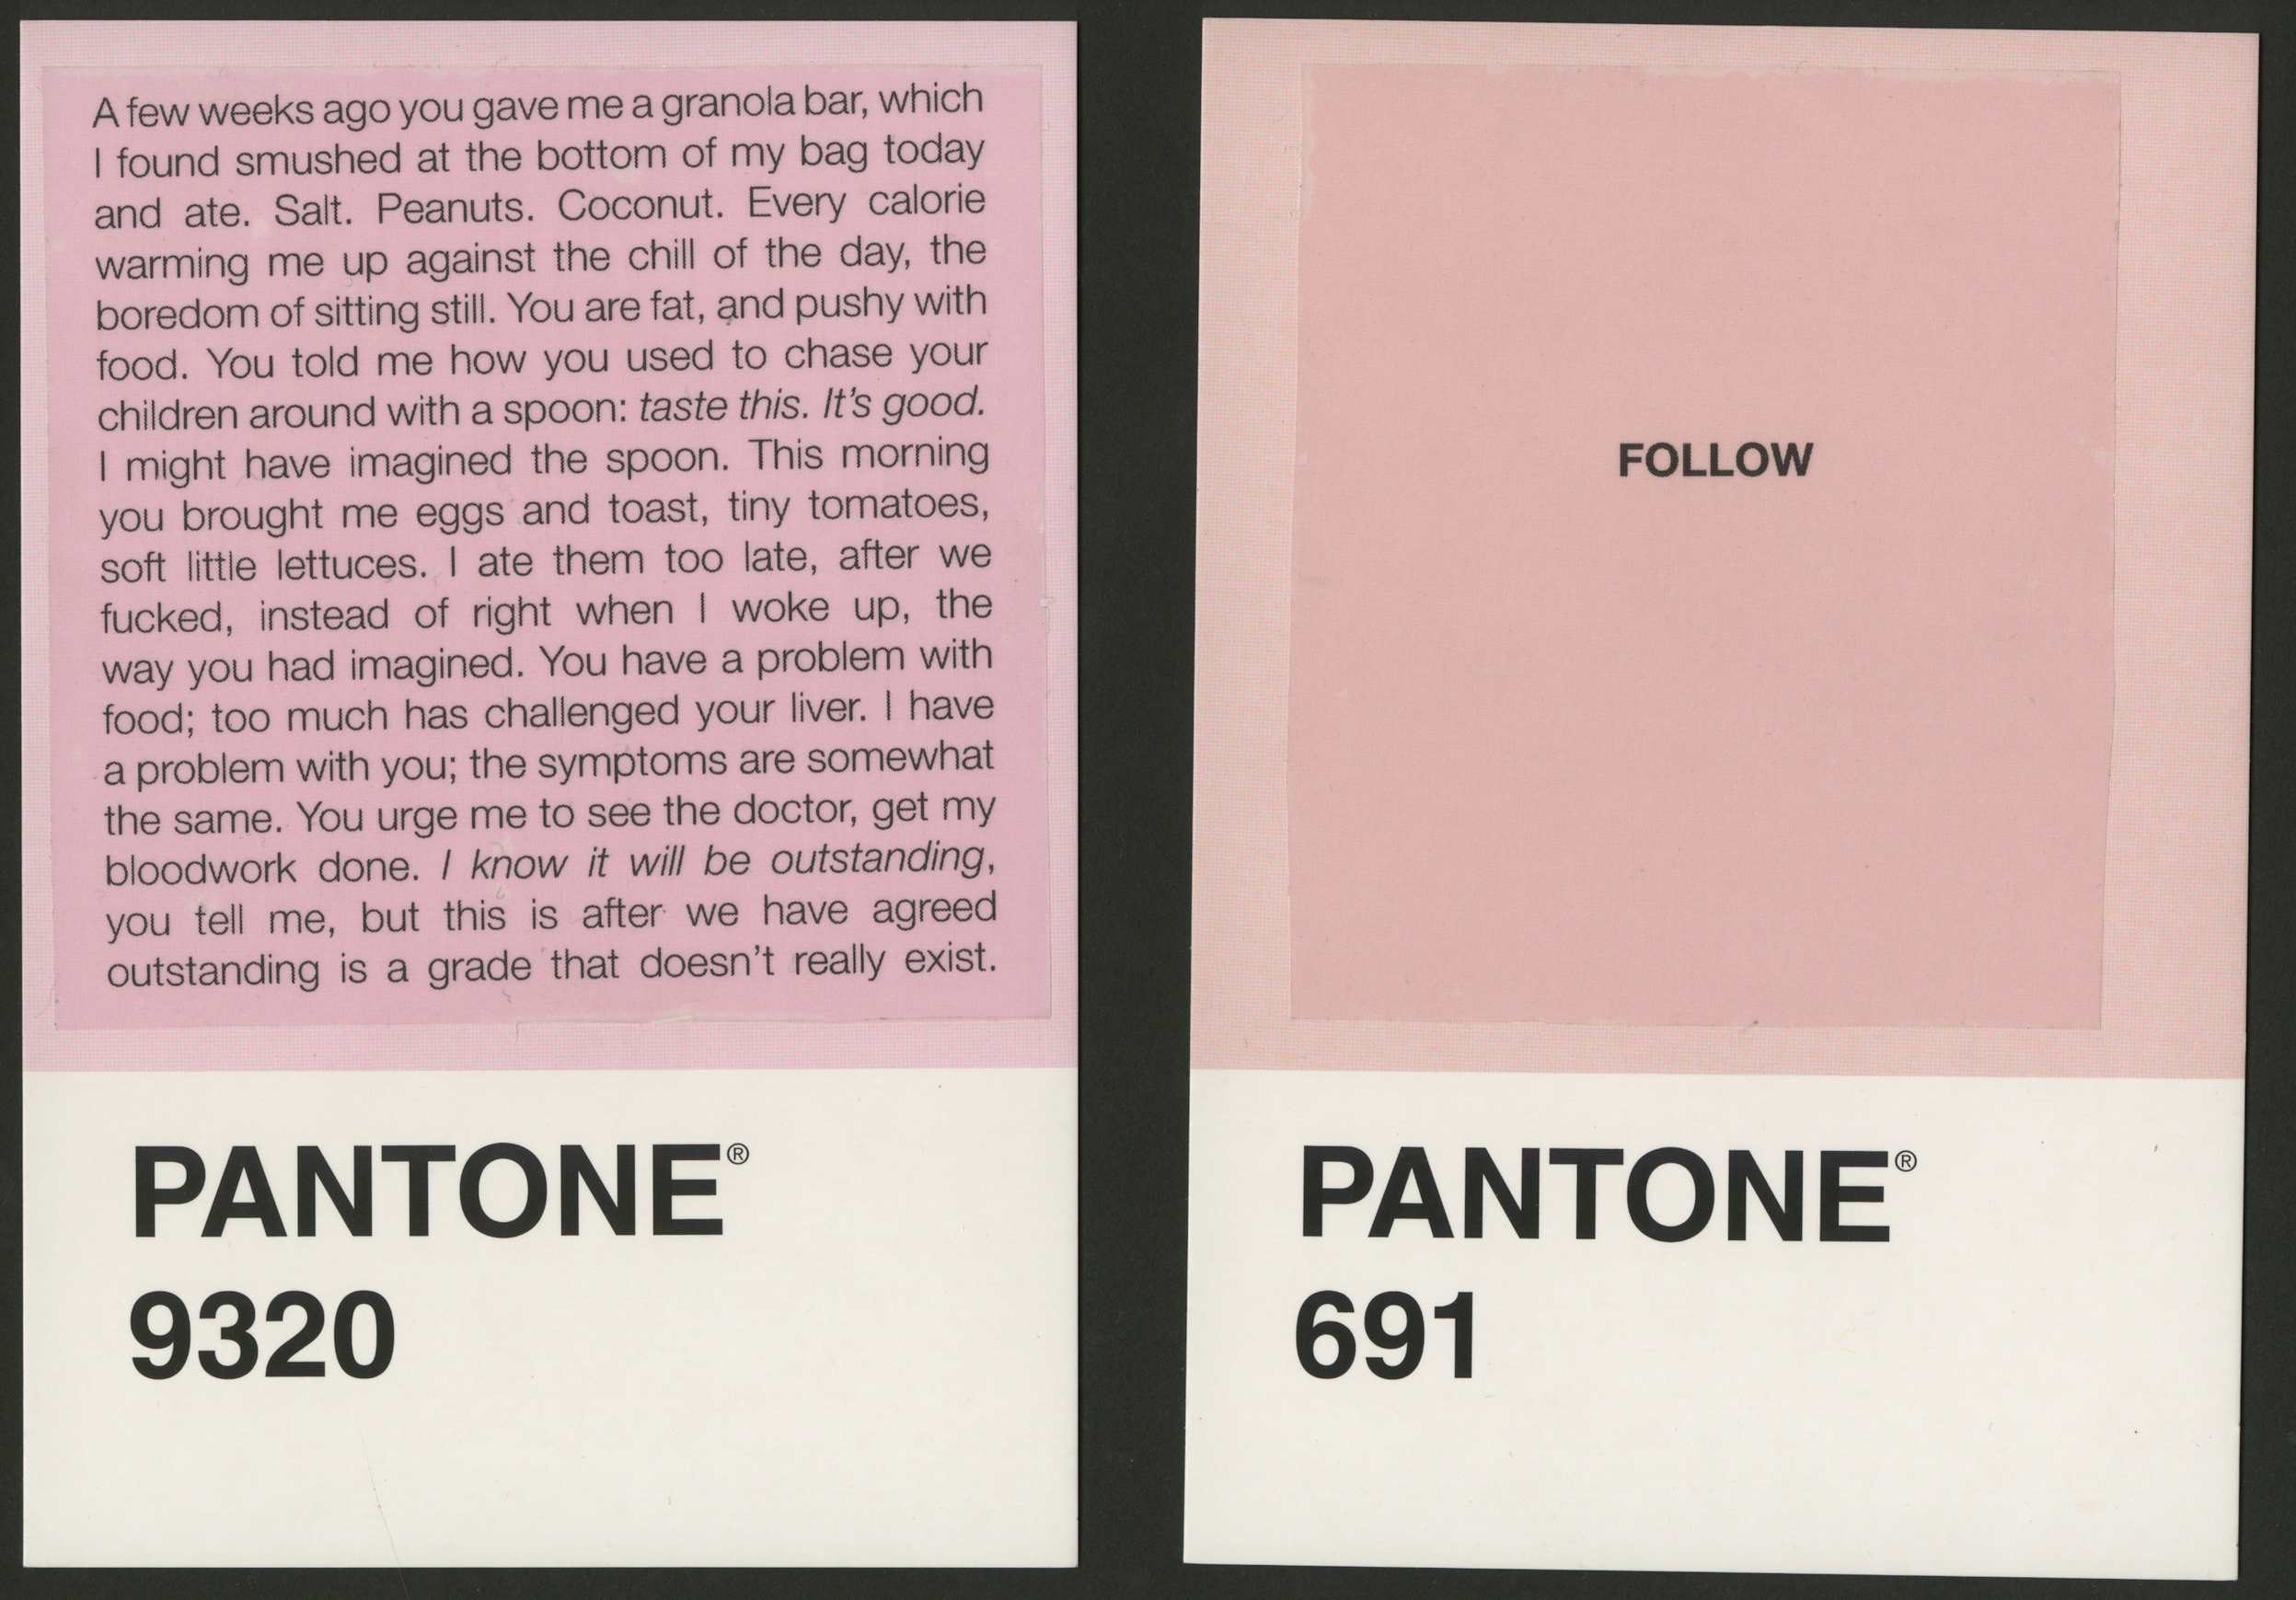 Two pinkish Pantone swatches side by side, one overlaid with a story about food and intimacy, one with the word "follow"